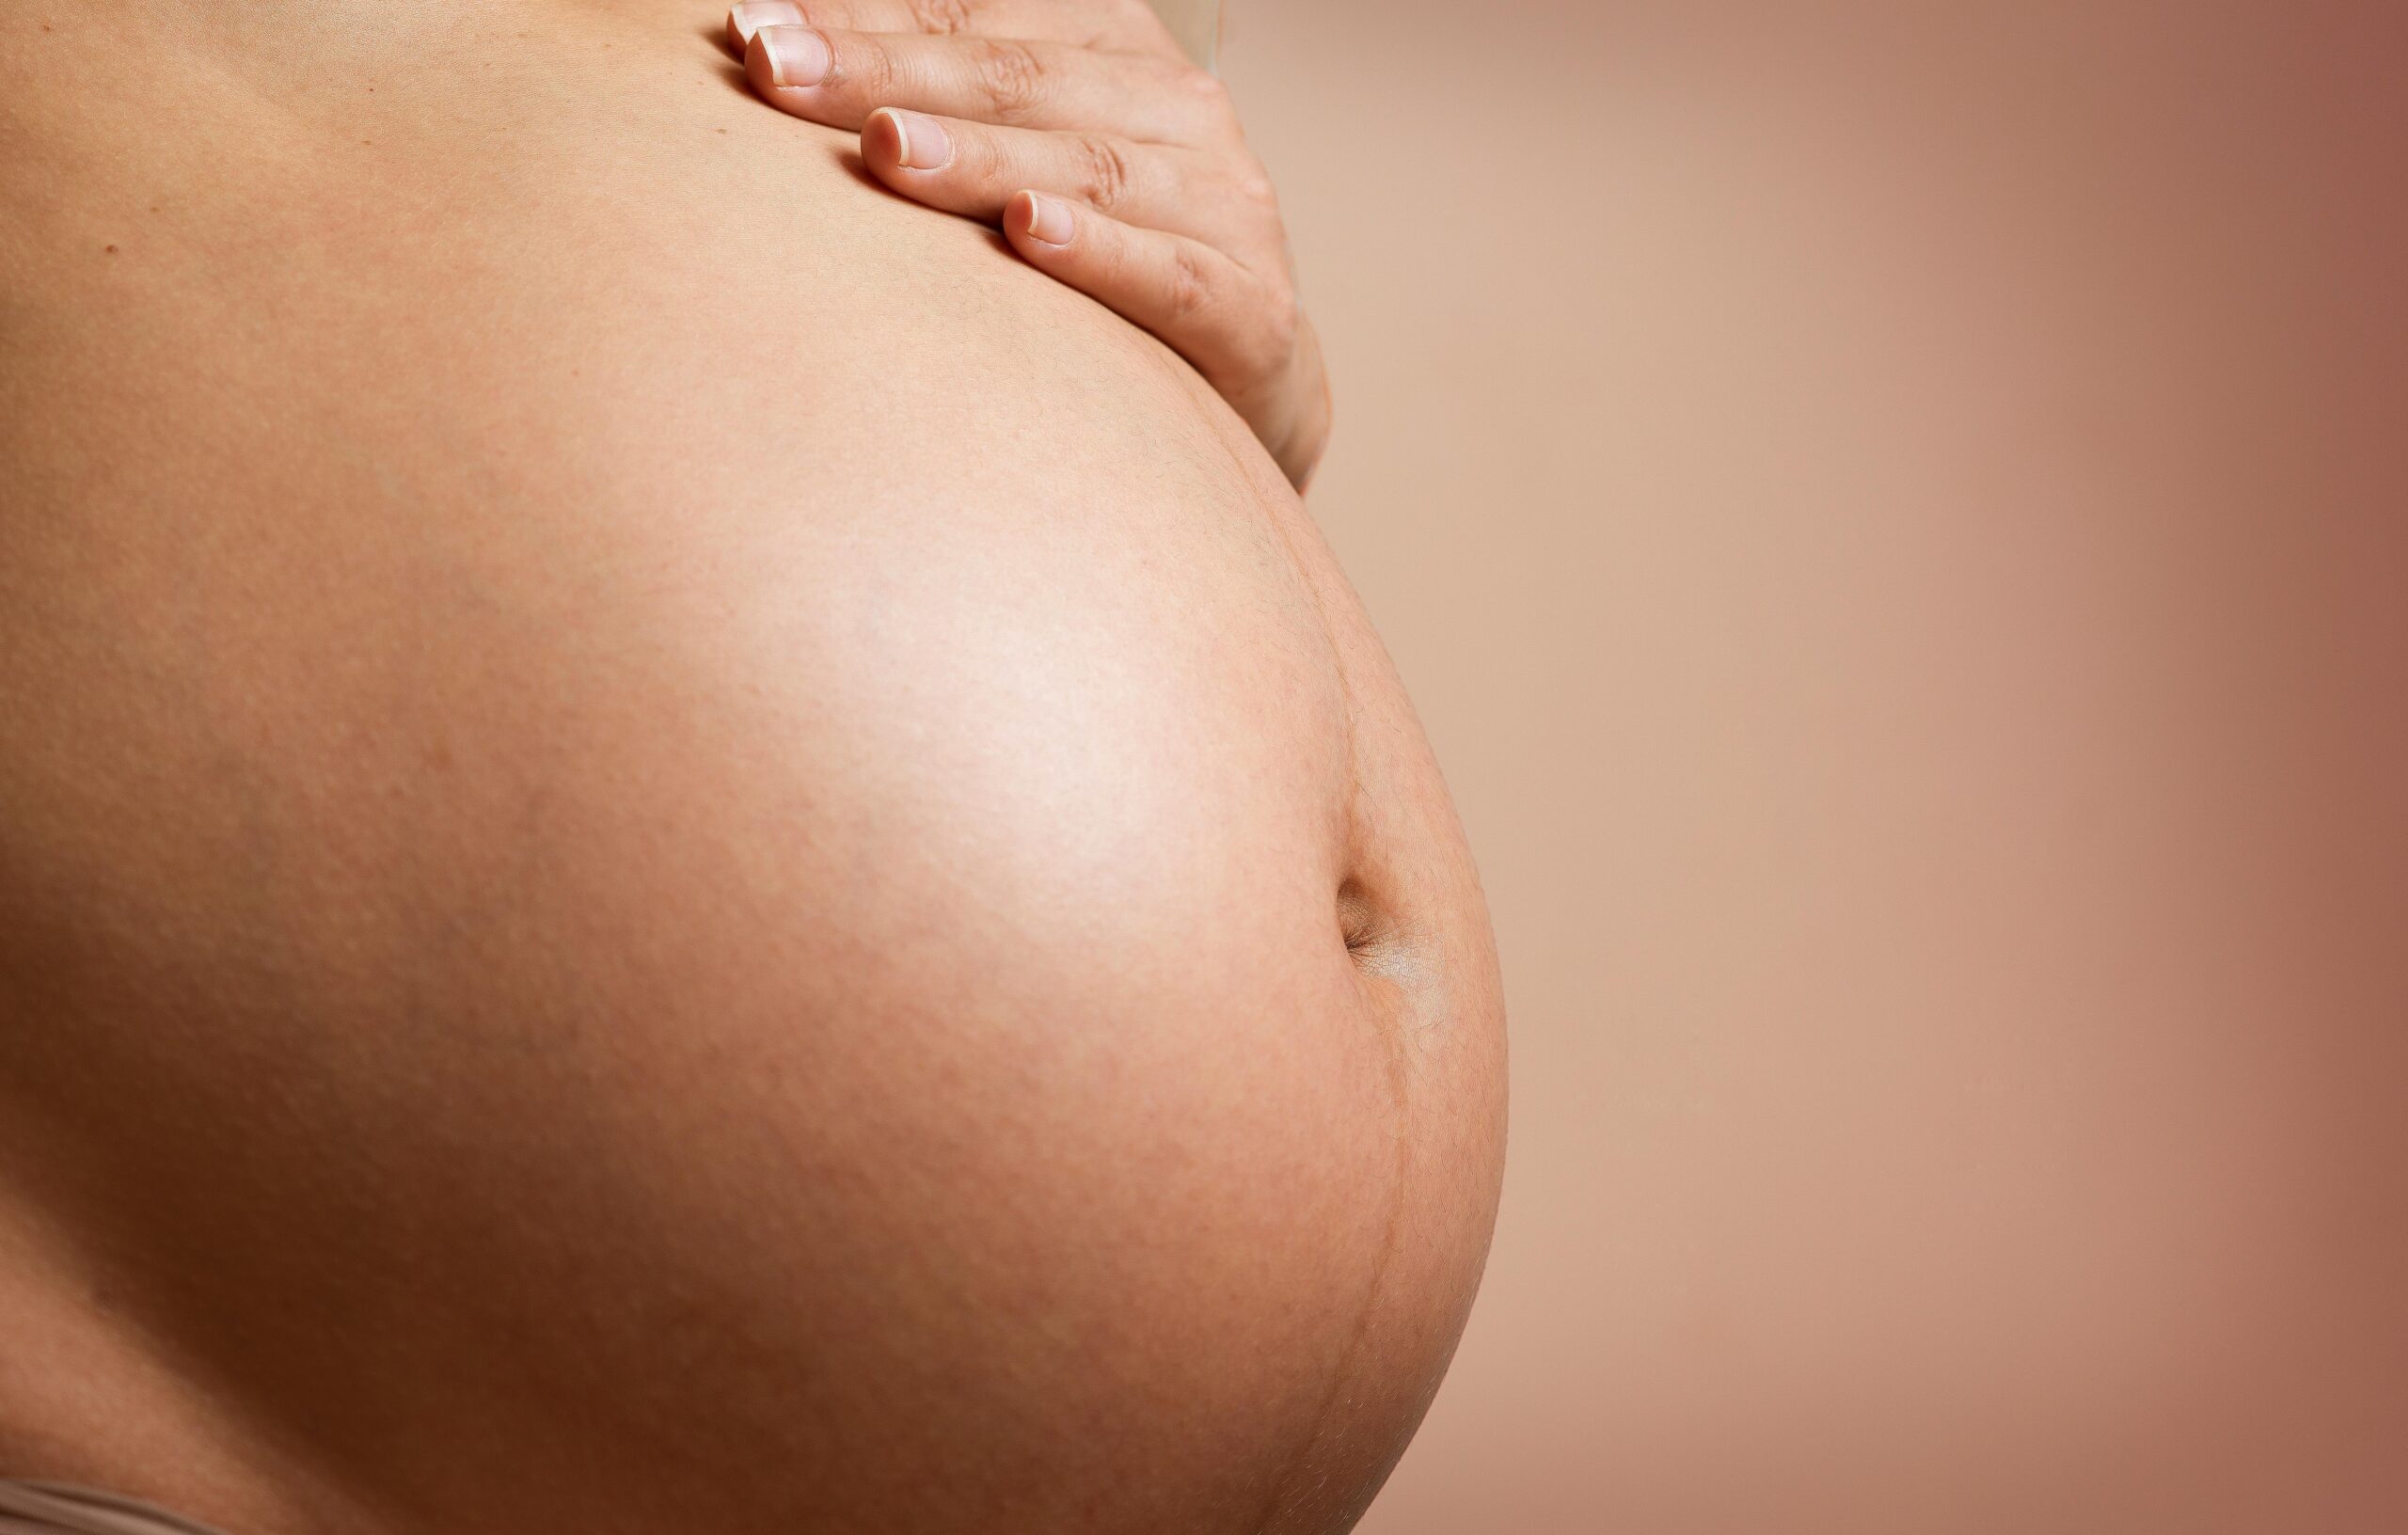 Can You Take Ozempic While Pregnant? Here Are The Potential Risks